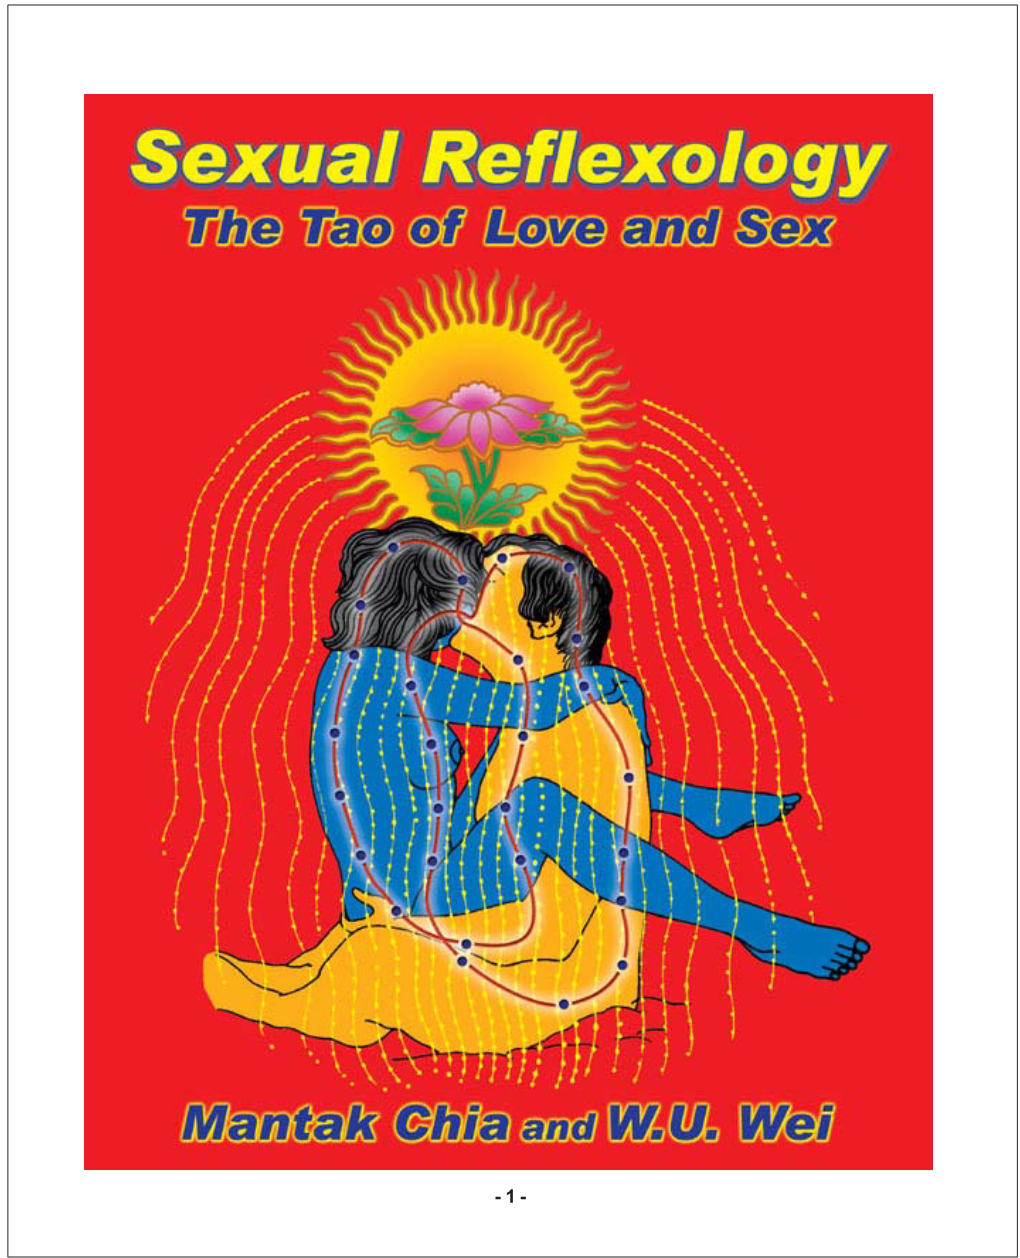 Sexual Reflexology the Tao of Love and Sex “Guide for Lovers”